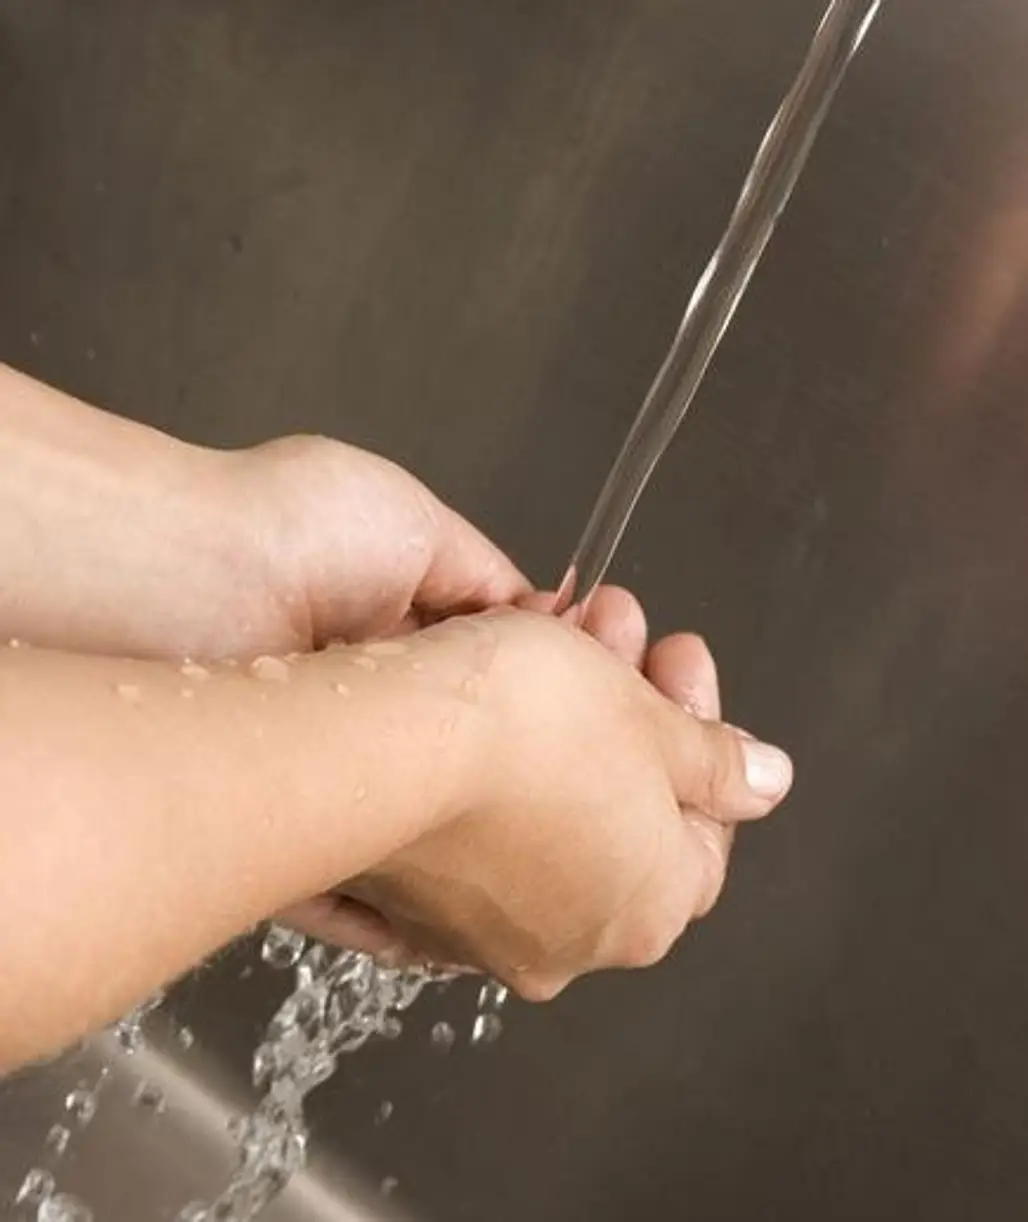 Cool down Quickly after a Sweat Session by Running Your Wrists under Cold Water